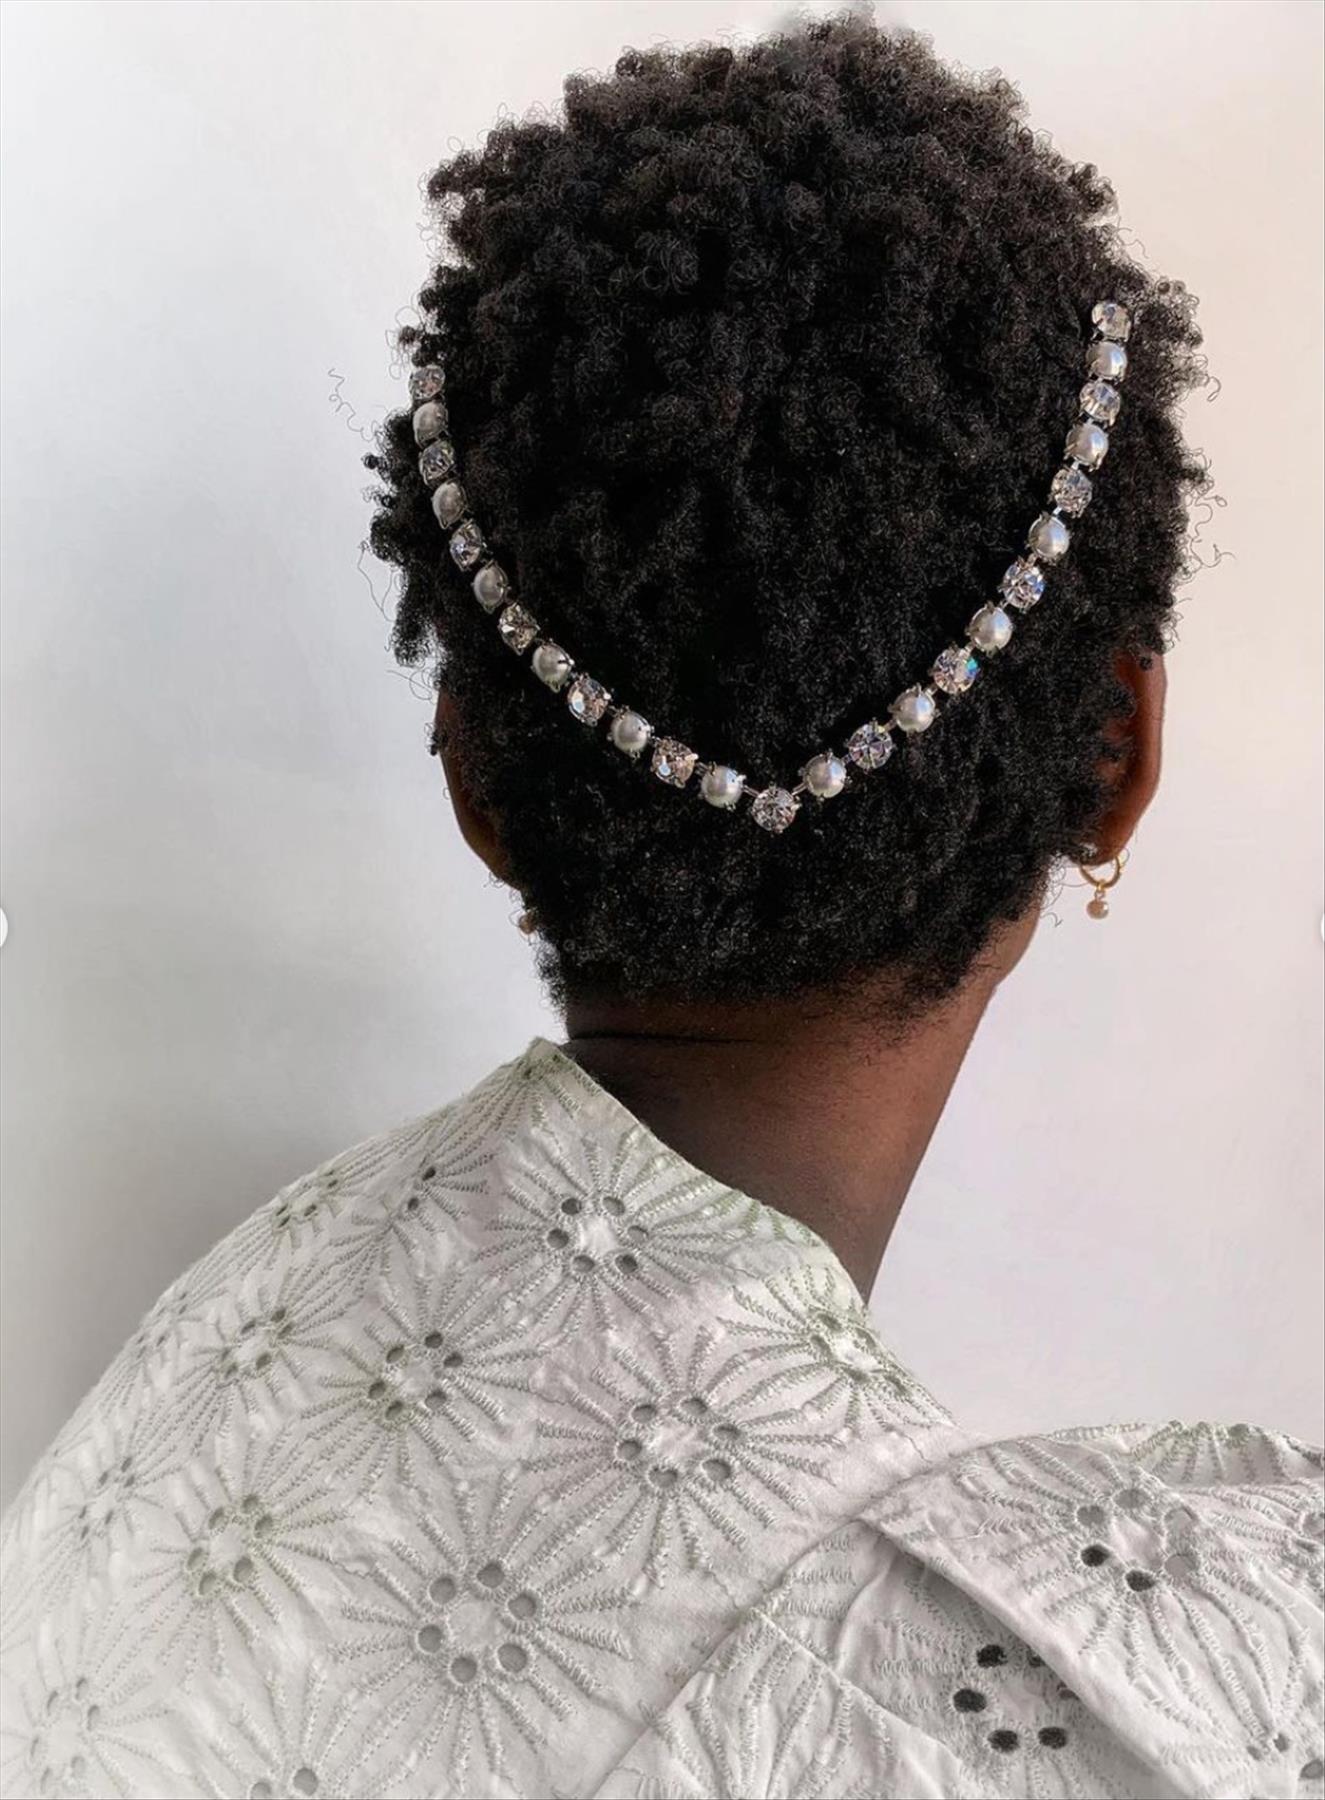 Stunning Prom hairstyle for short hair to be a queen 2022